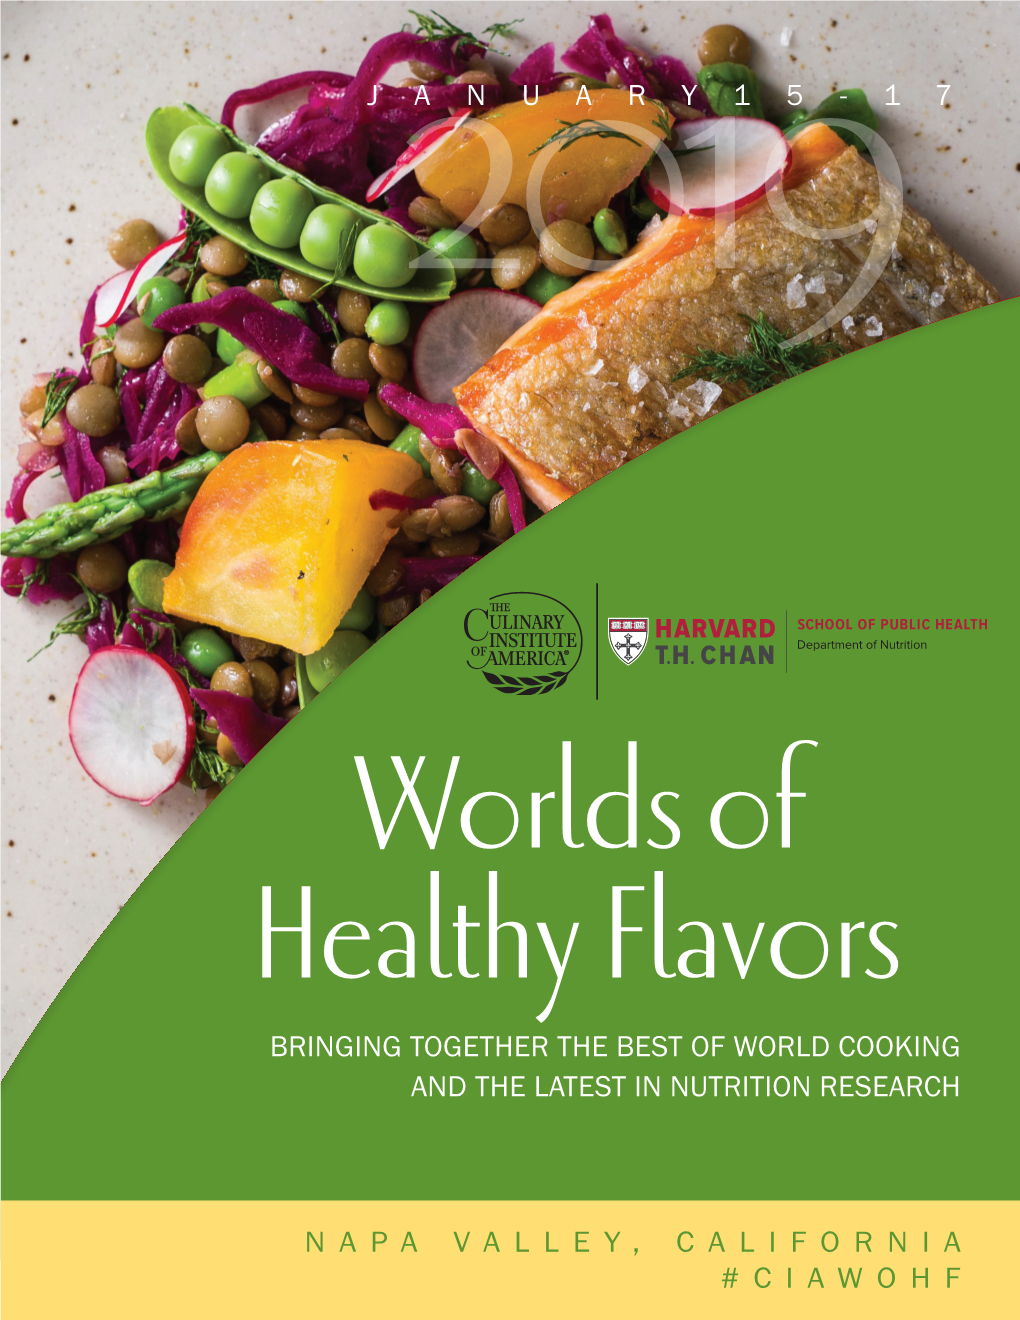 Worlds of Healthy Flavors BRINGING TOGETHER the BEST of WORLD COOKING and the LATEST in NUTRITION RESEARCH